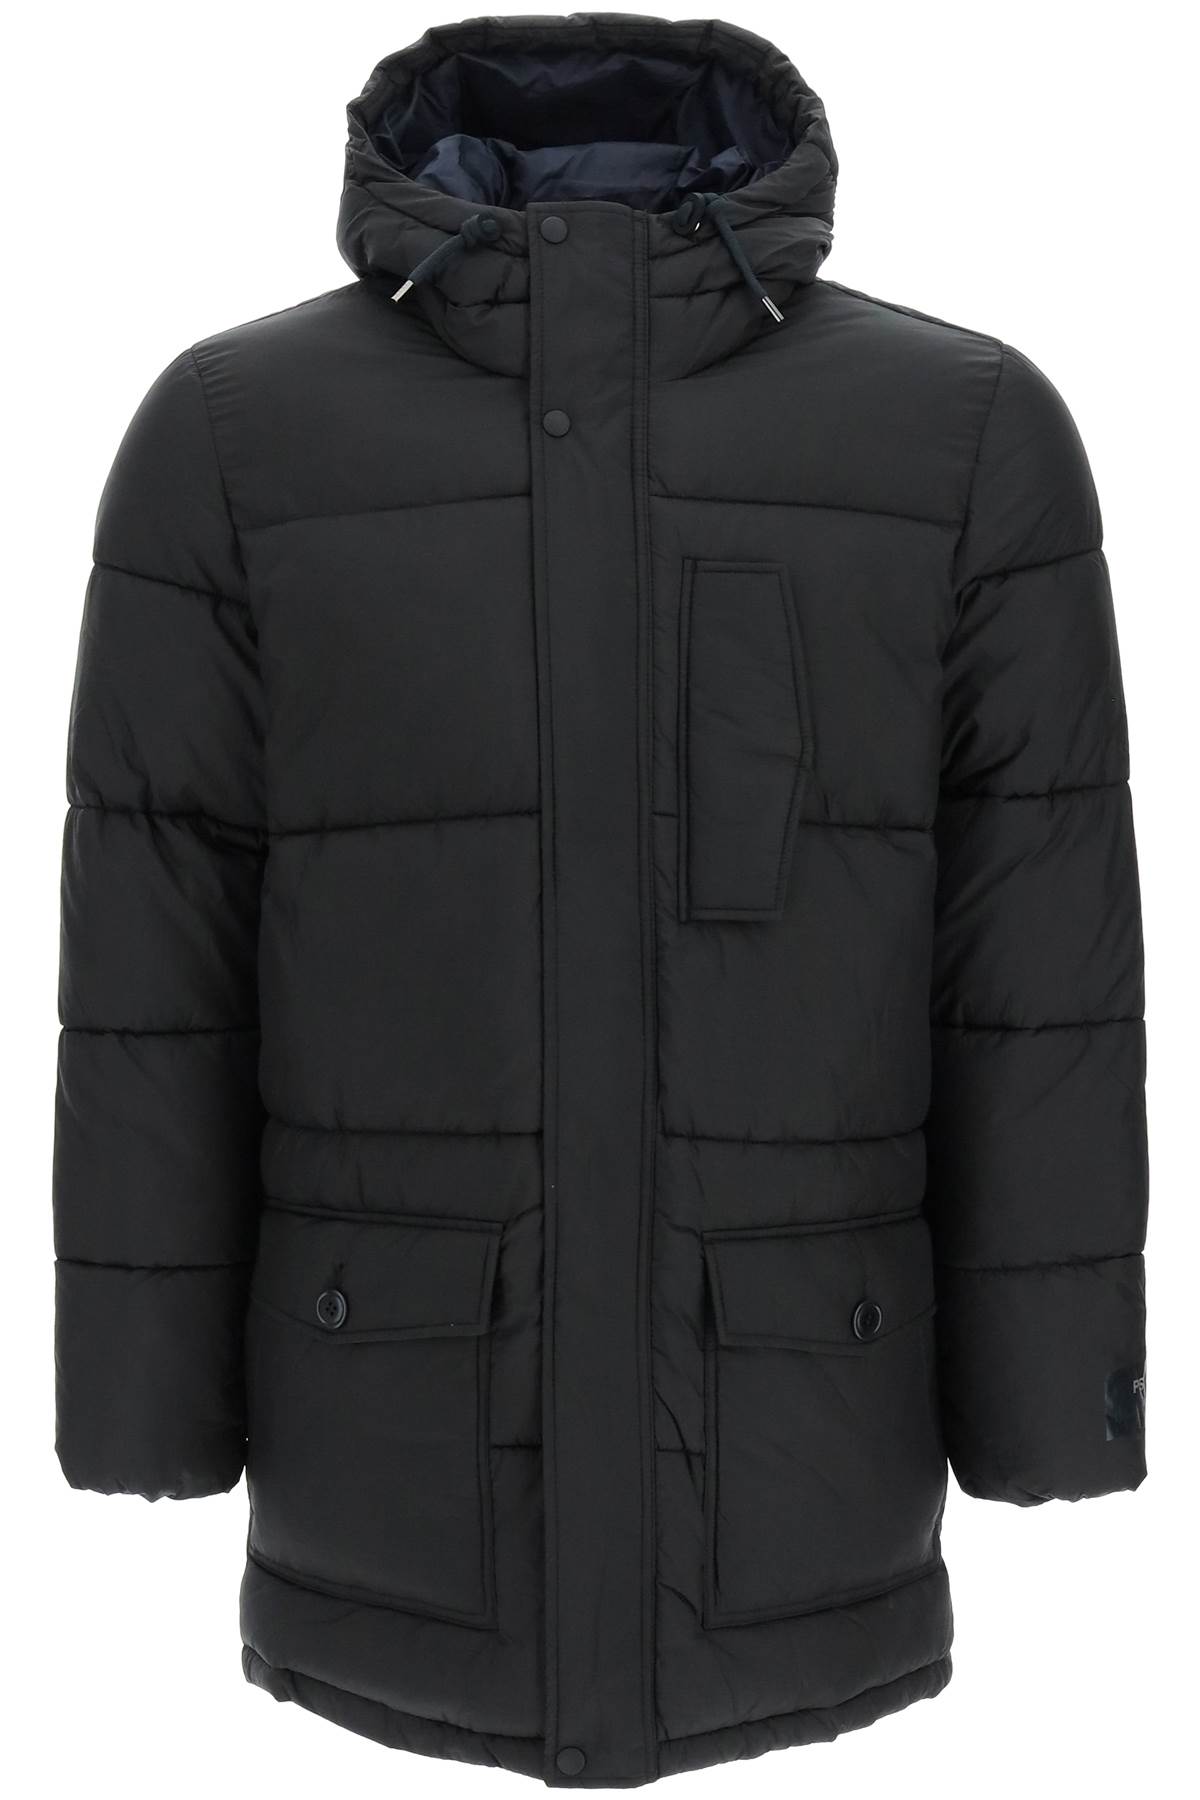 PS by Paul Smith Recycled Nylon Down Parka